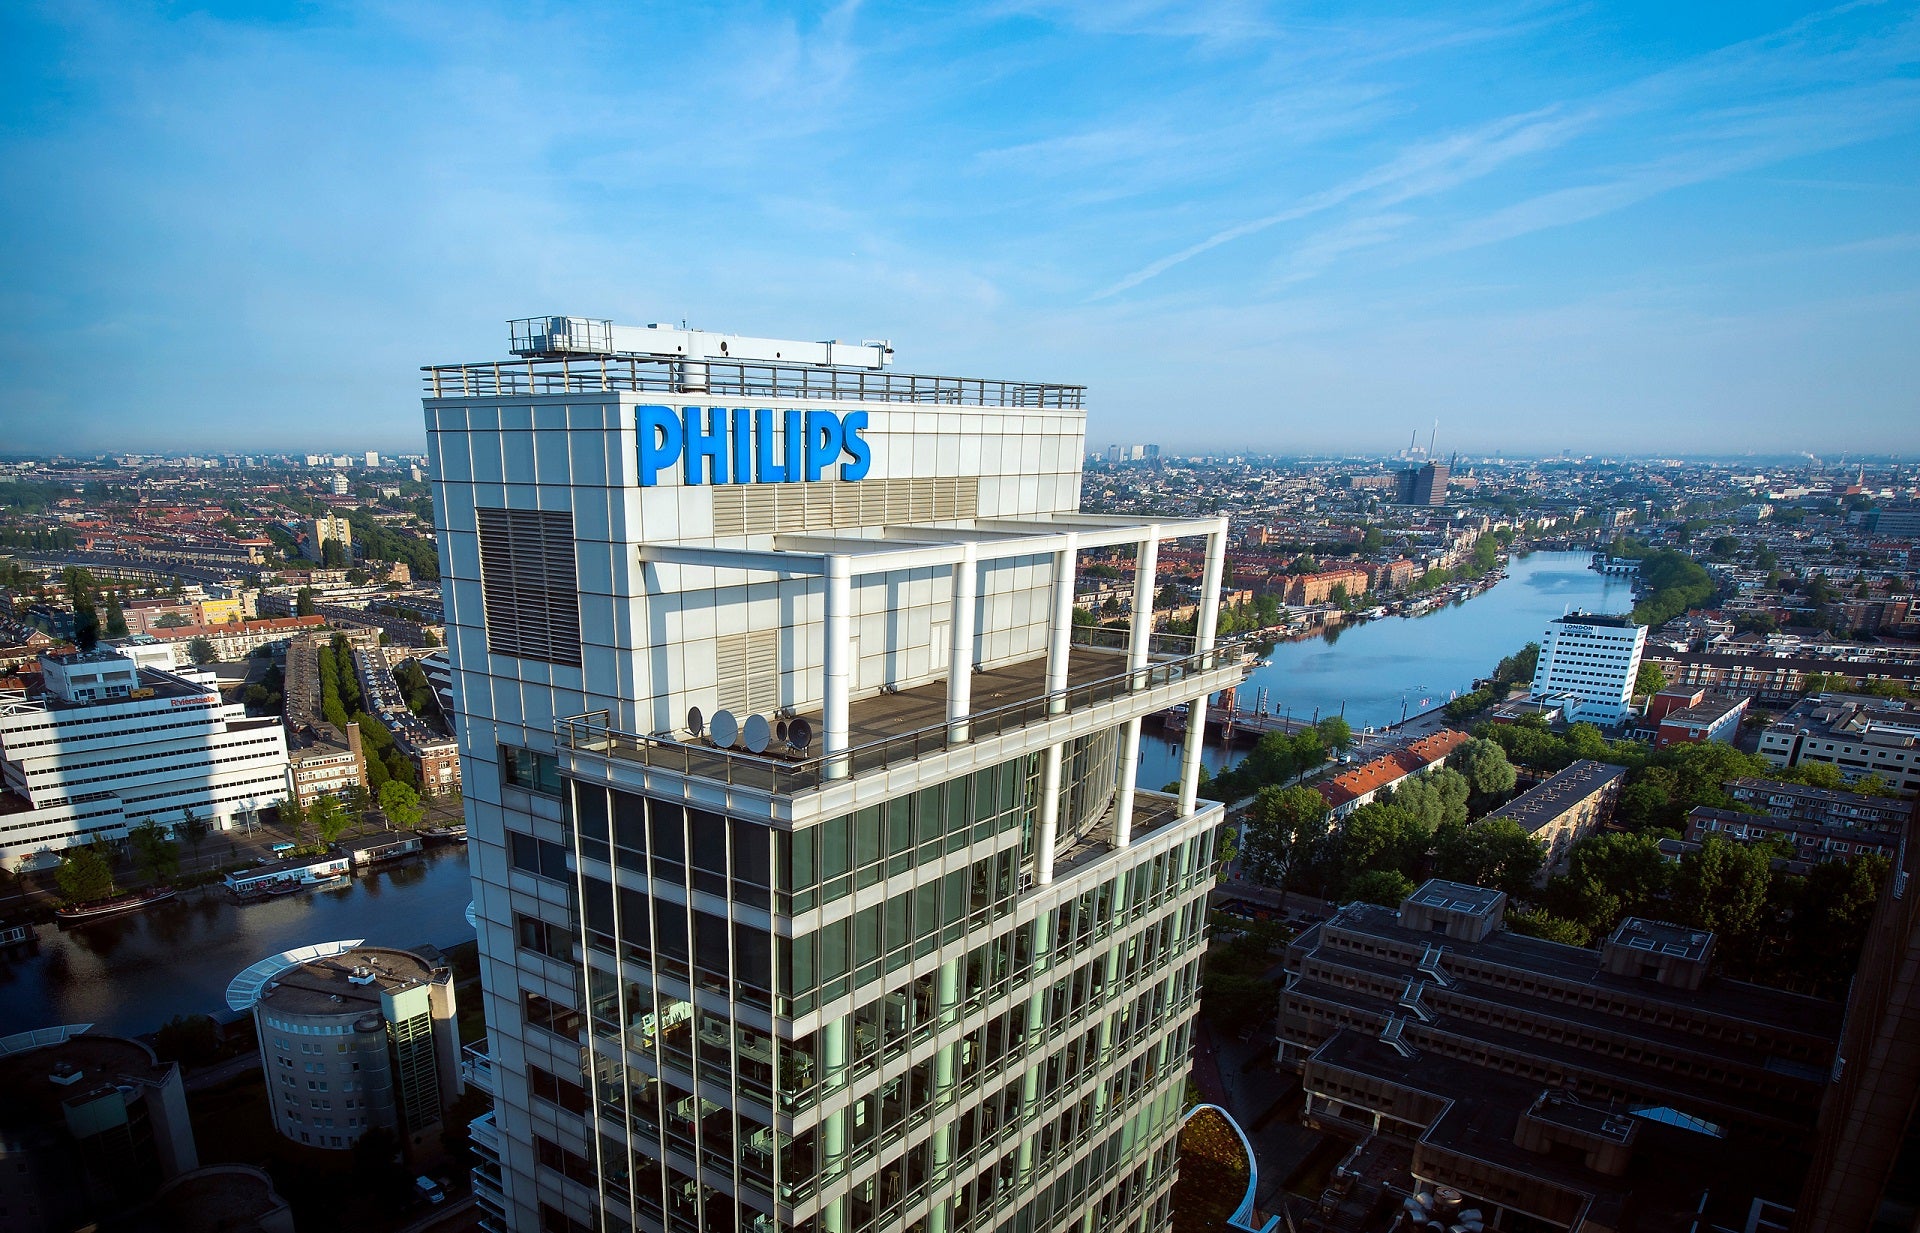 Royal Philips to acquire French medical technology firm Cardiologs